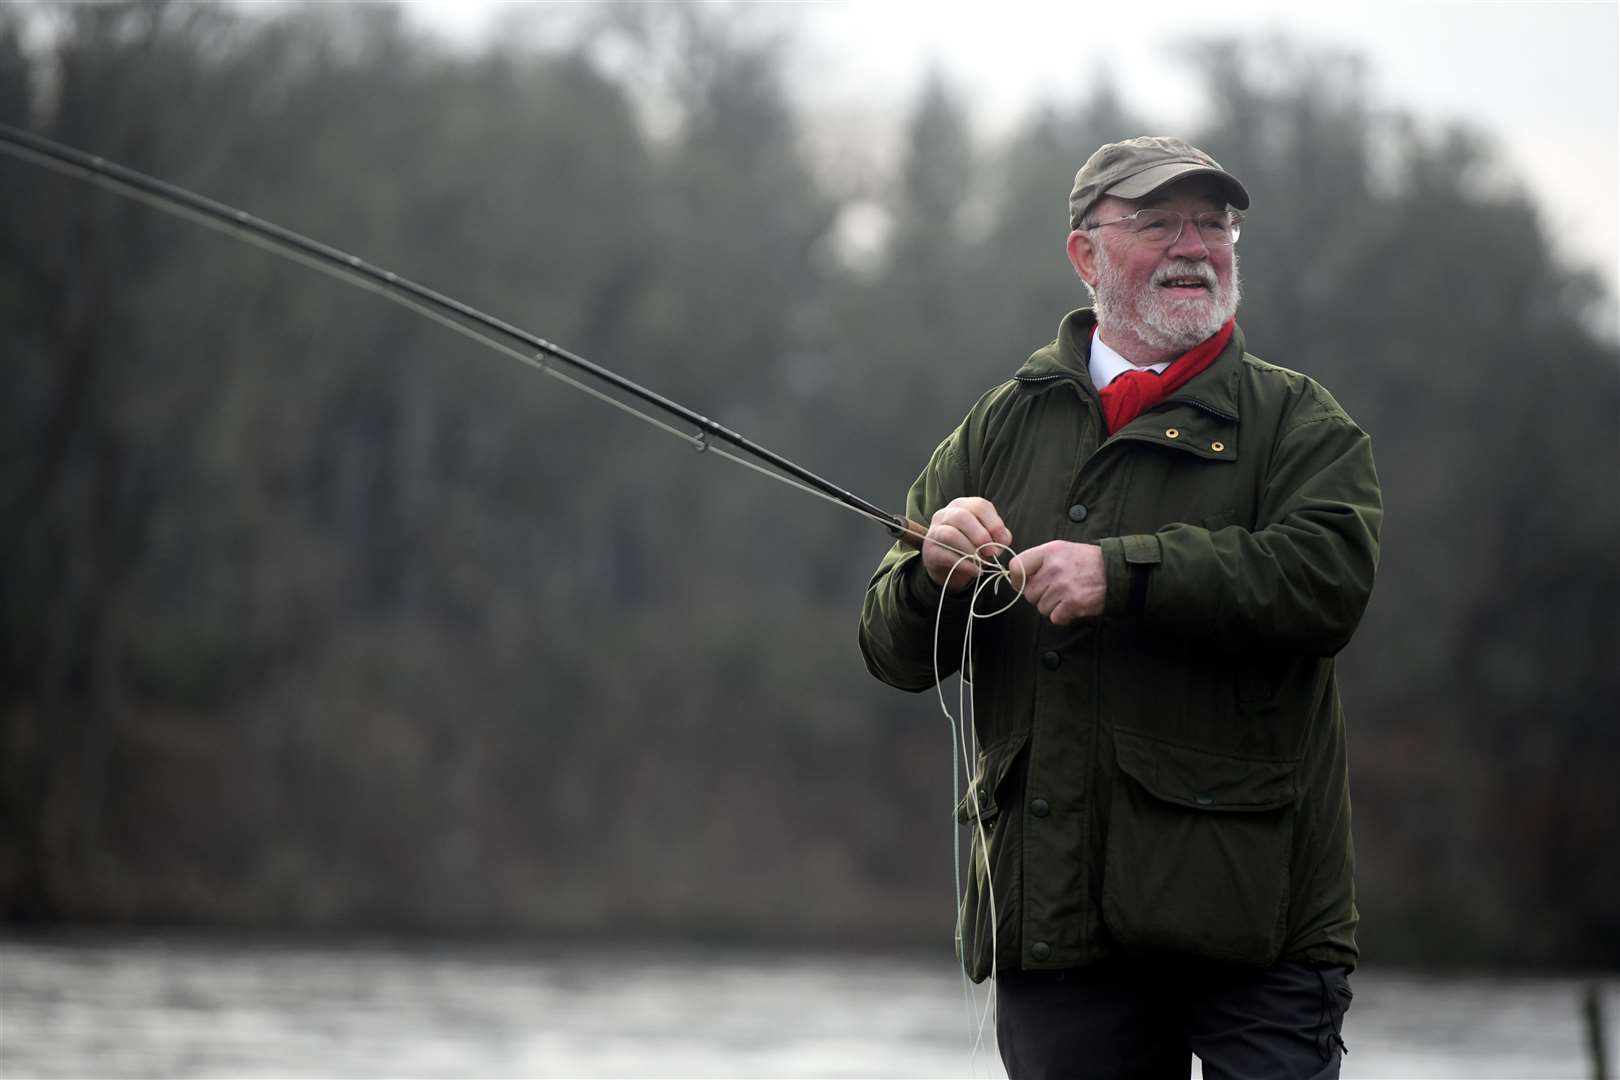 Ewen Robertson made the first cast of the season. Picture: James Mackenzie.